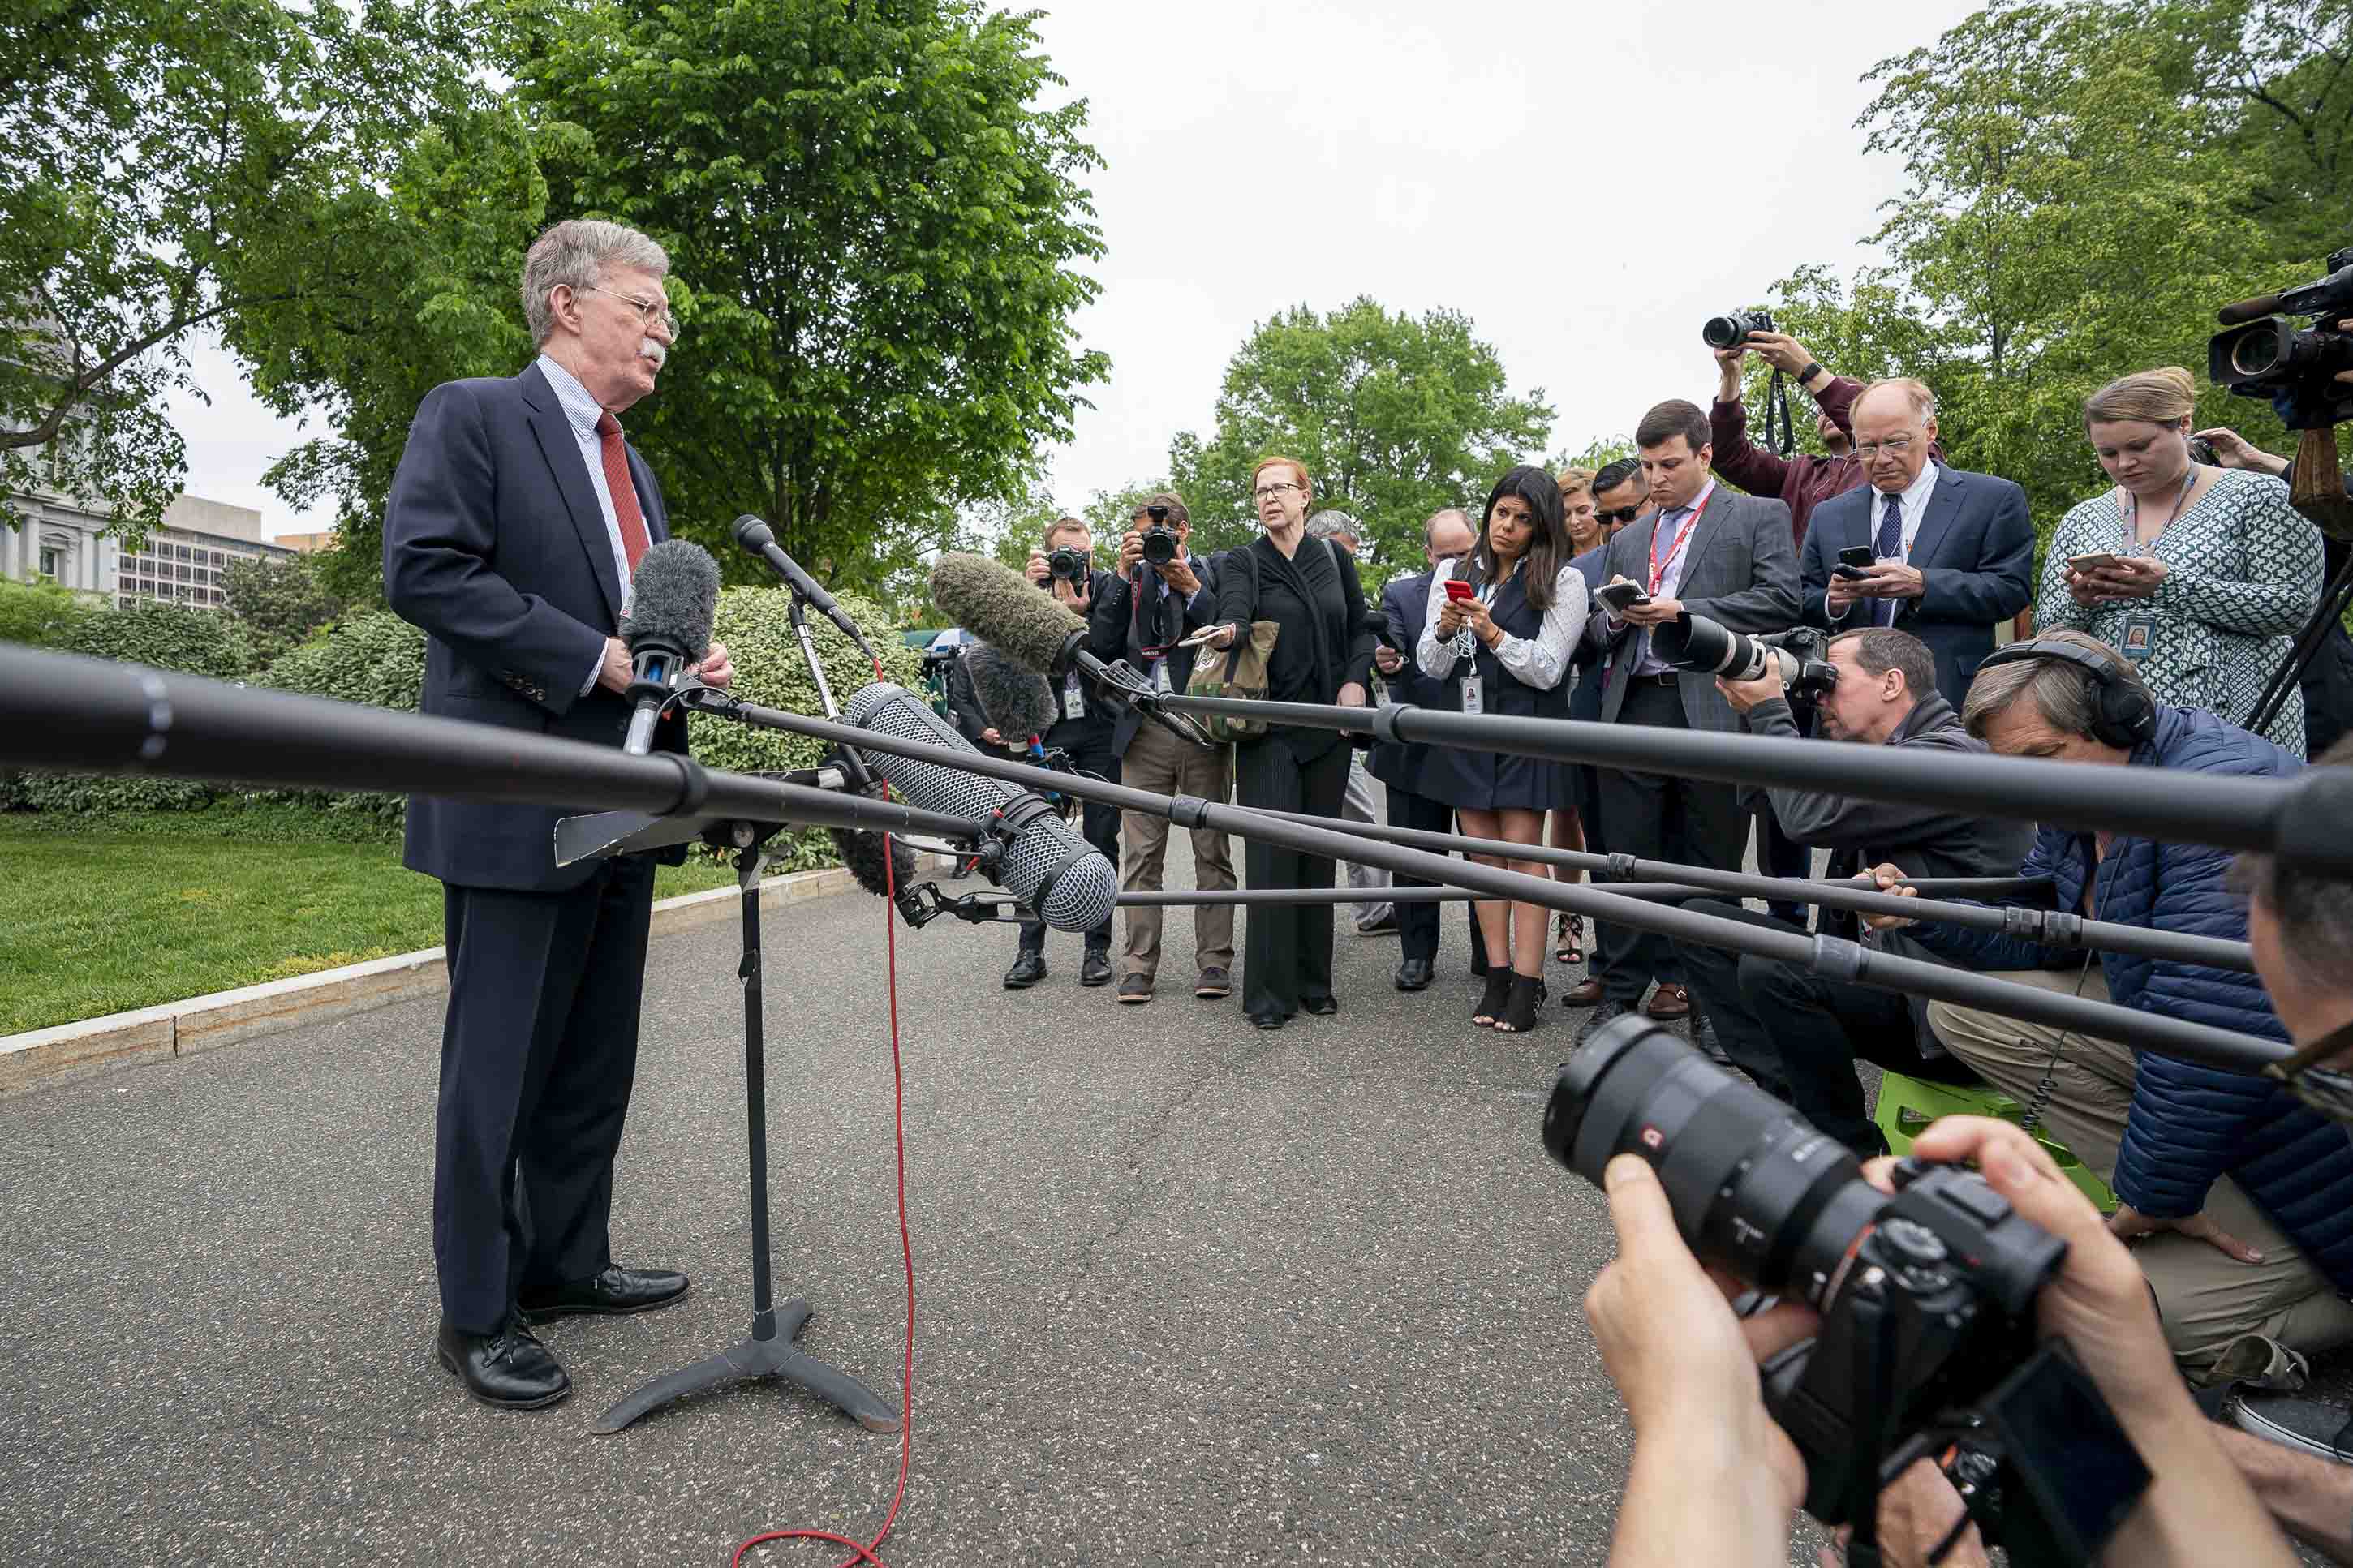 John Bolton stands in front of numerous microphones and reporters